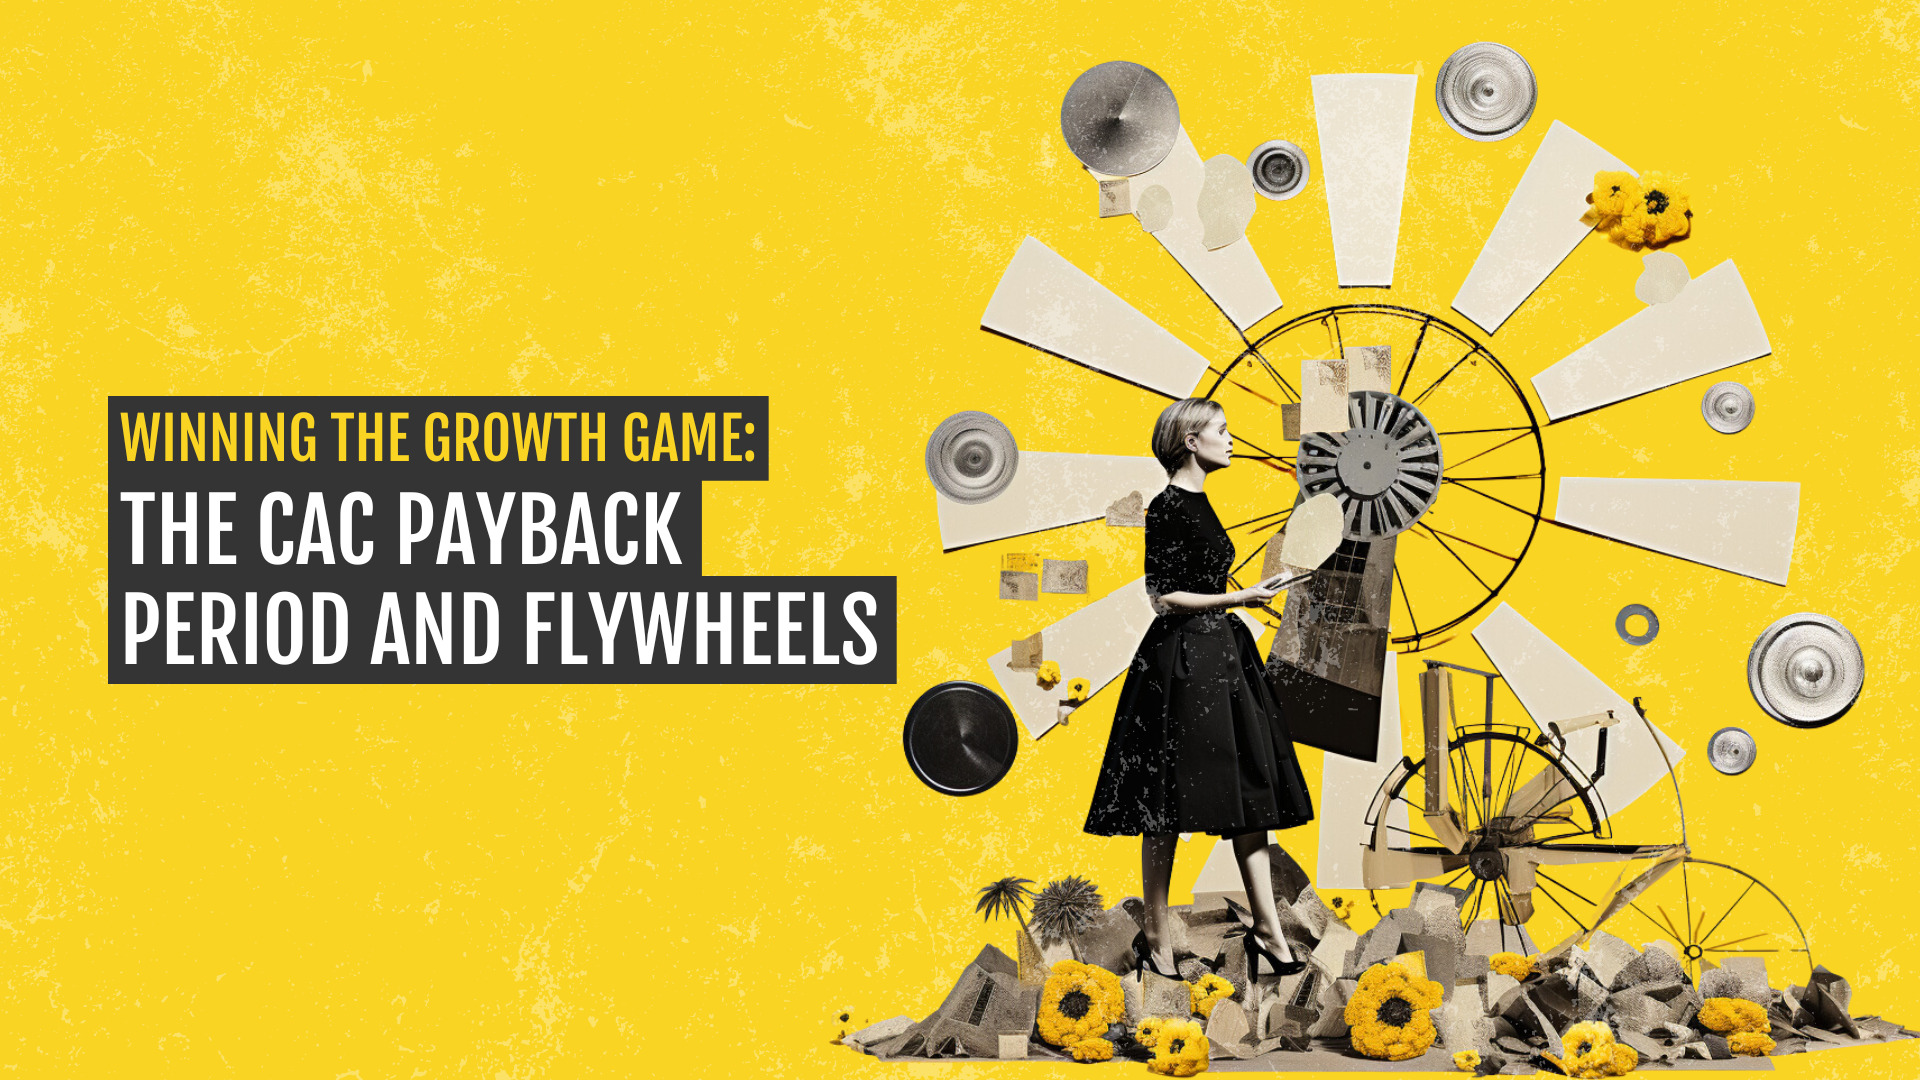 WINNING THE GROWTH GAME THE CAC PAYBACK PERIOD AND FLYWHEELS